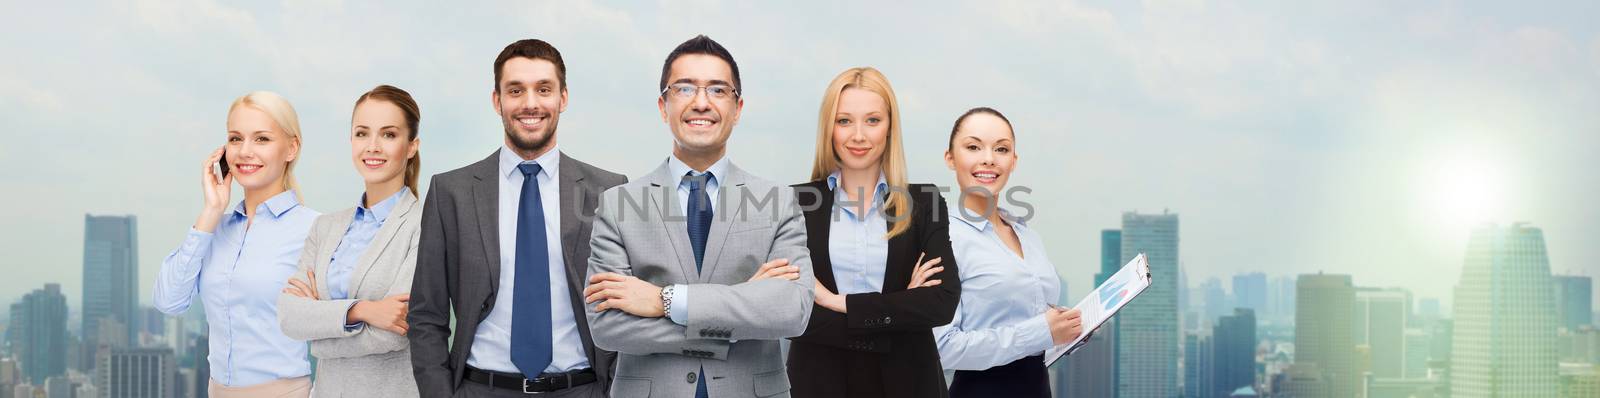 business, people, gesture and office concept - group of smiling businessmen over city background